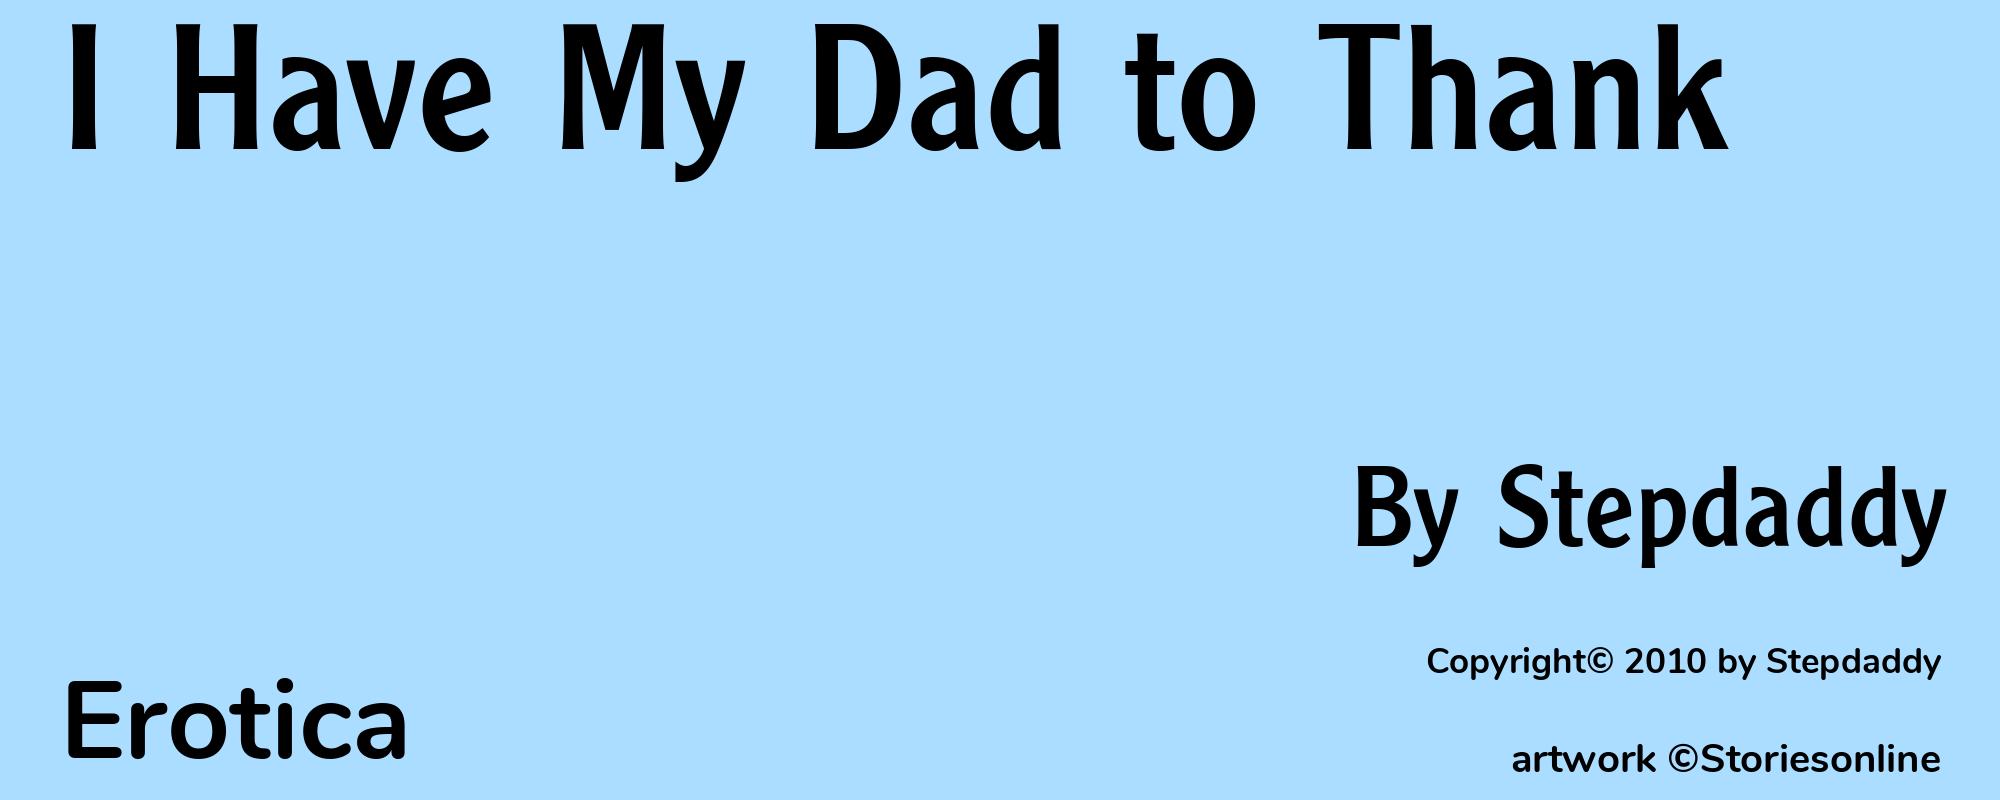 I Have My Dad to Thank - Cover